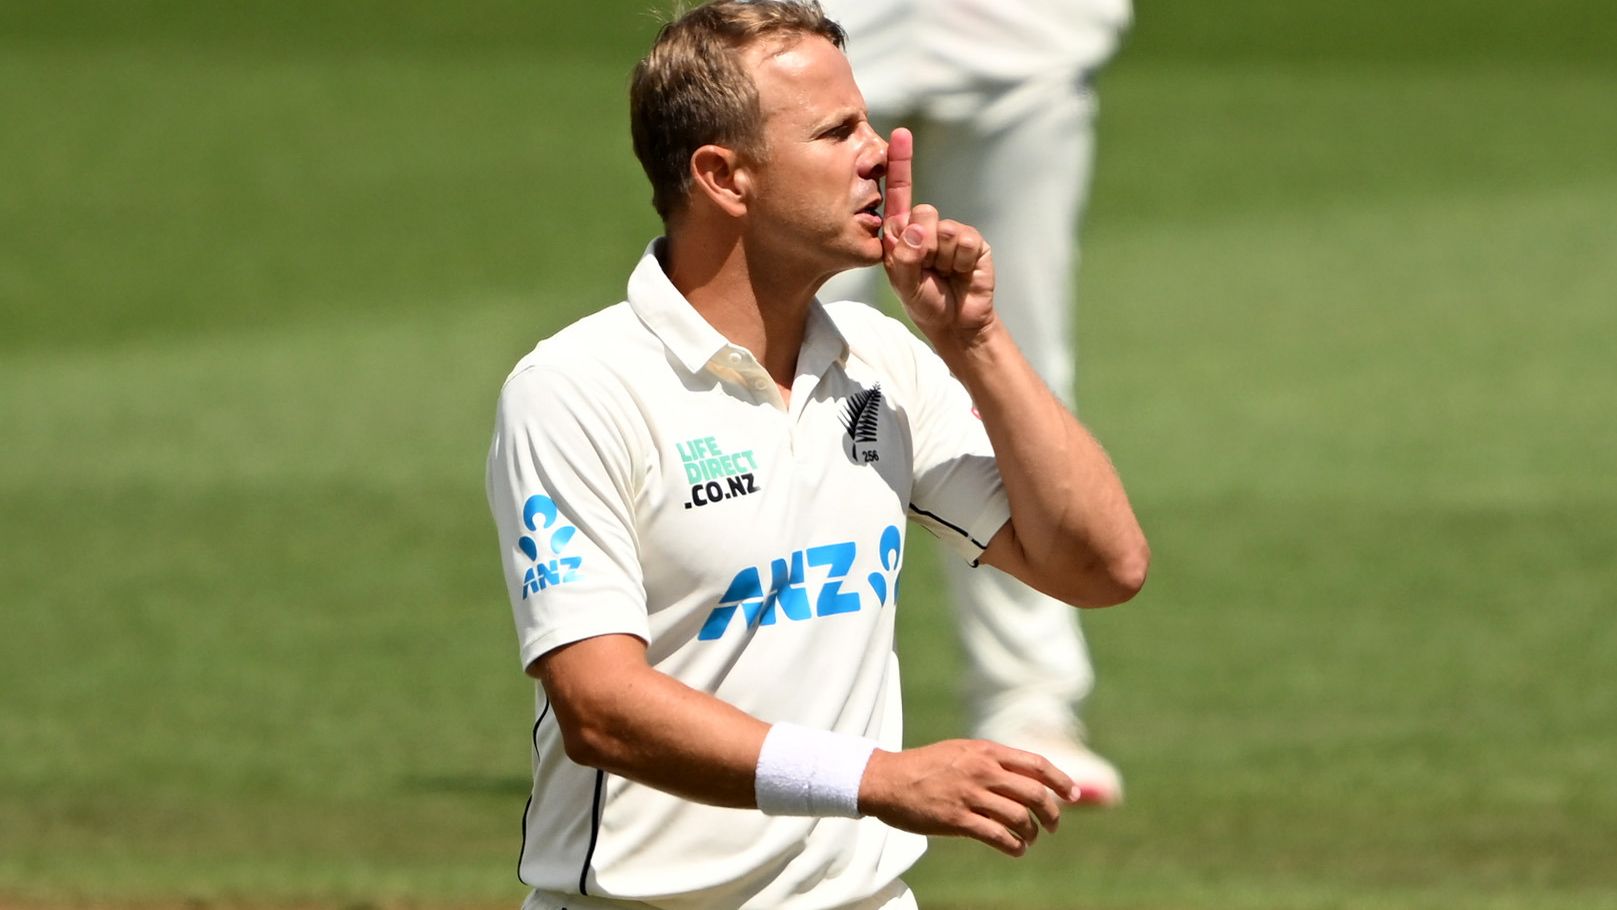 'There's no sugarcoating it': Former Black Caps captain's bombshell claim over star's retirement